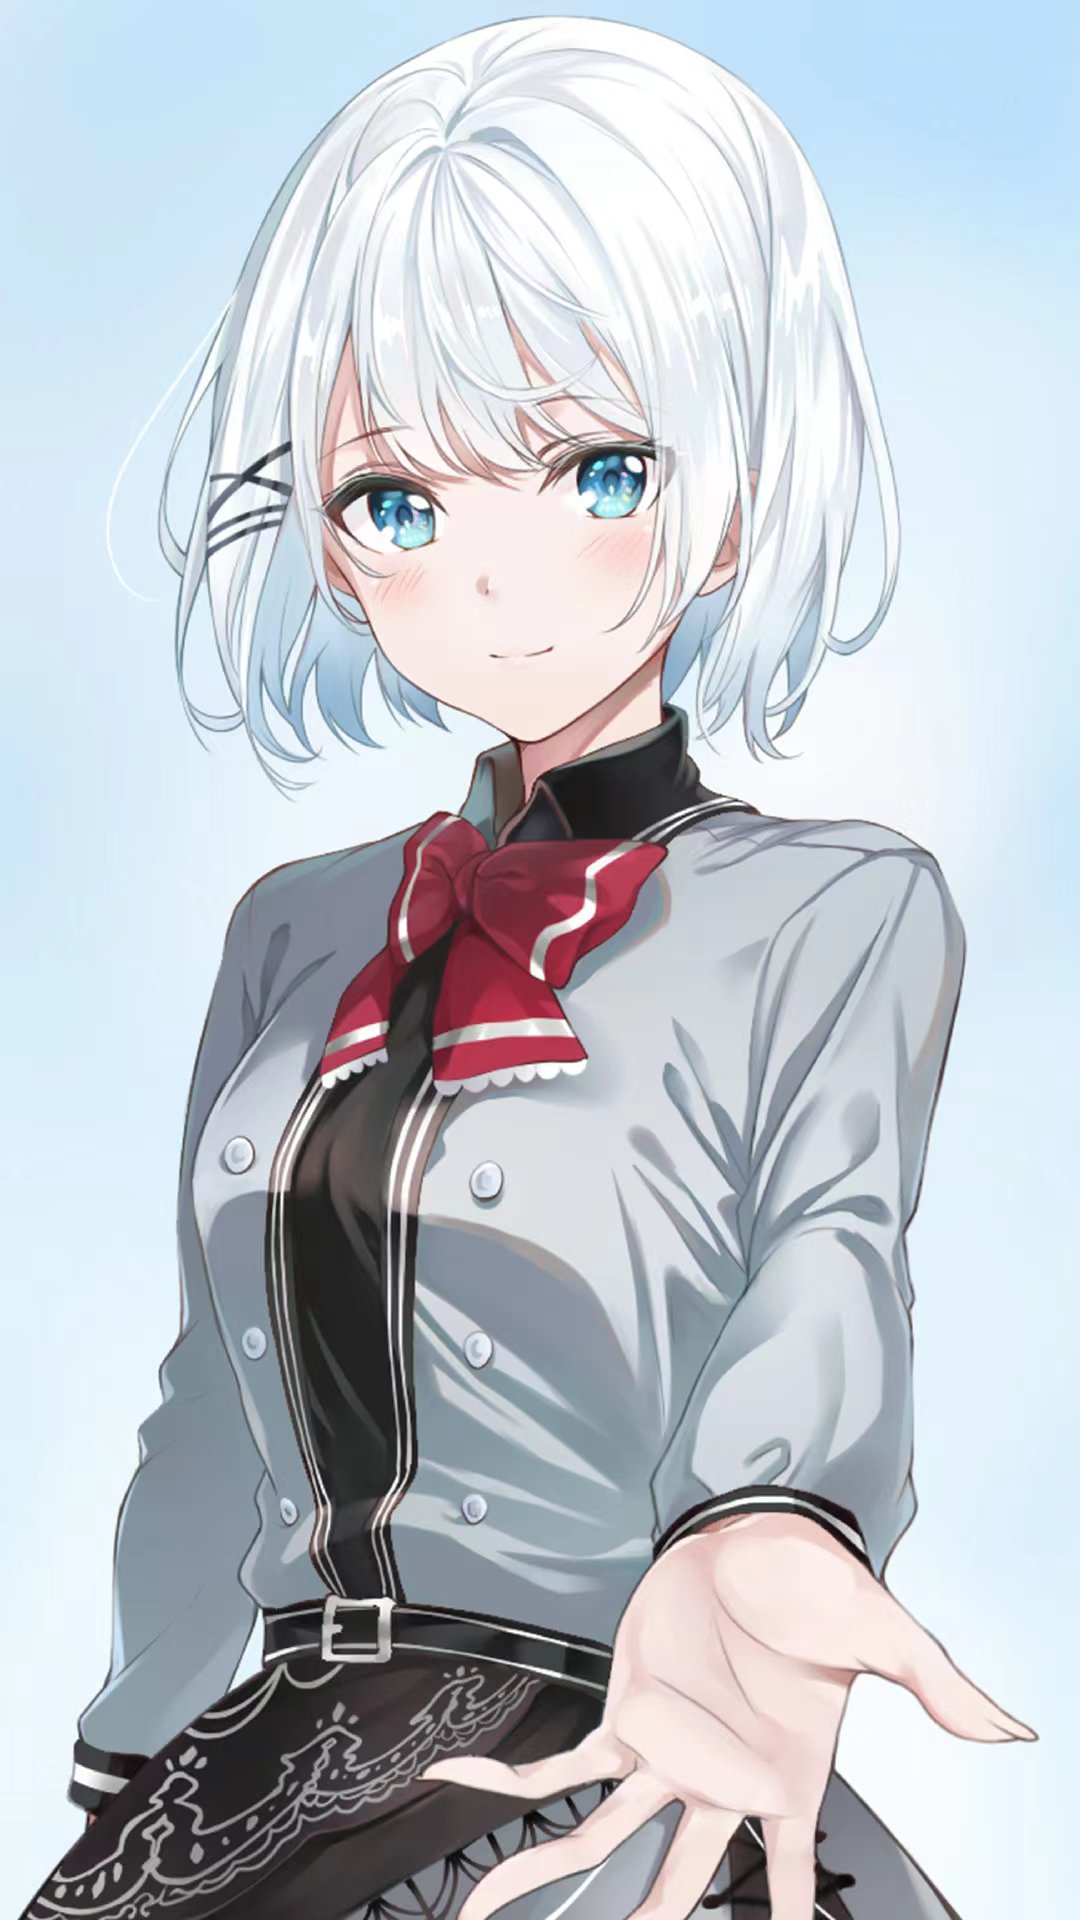 The 29 Greatest Anime Girls With White Hair, Ranked